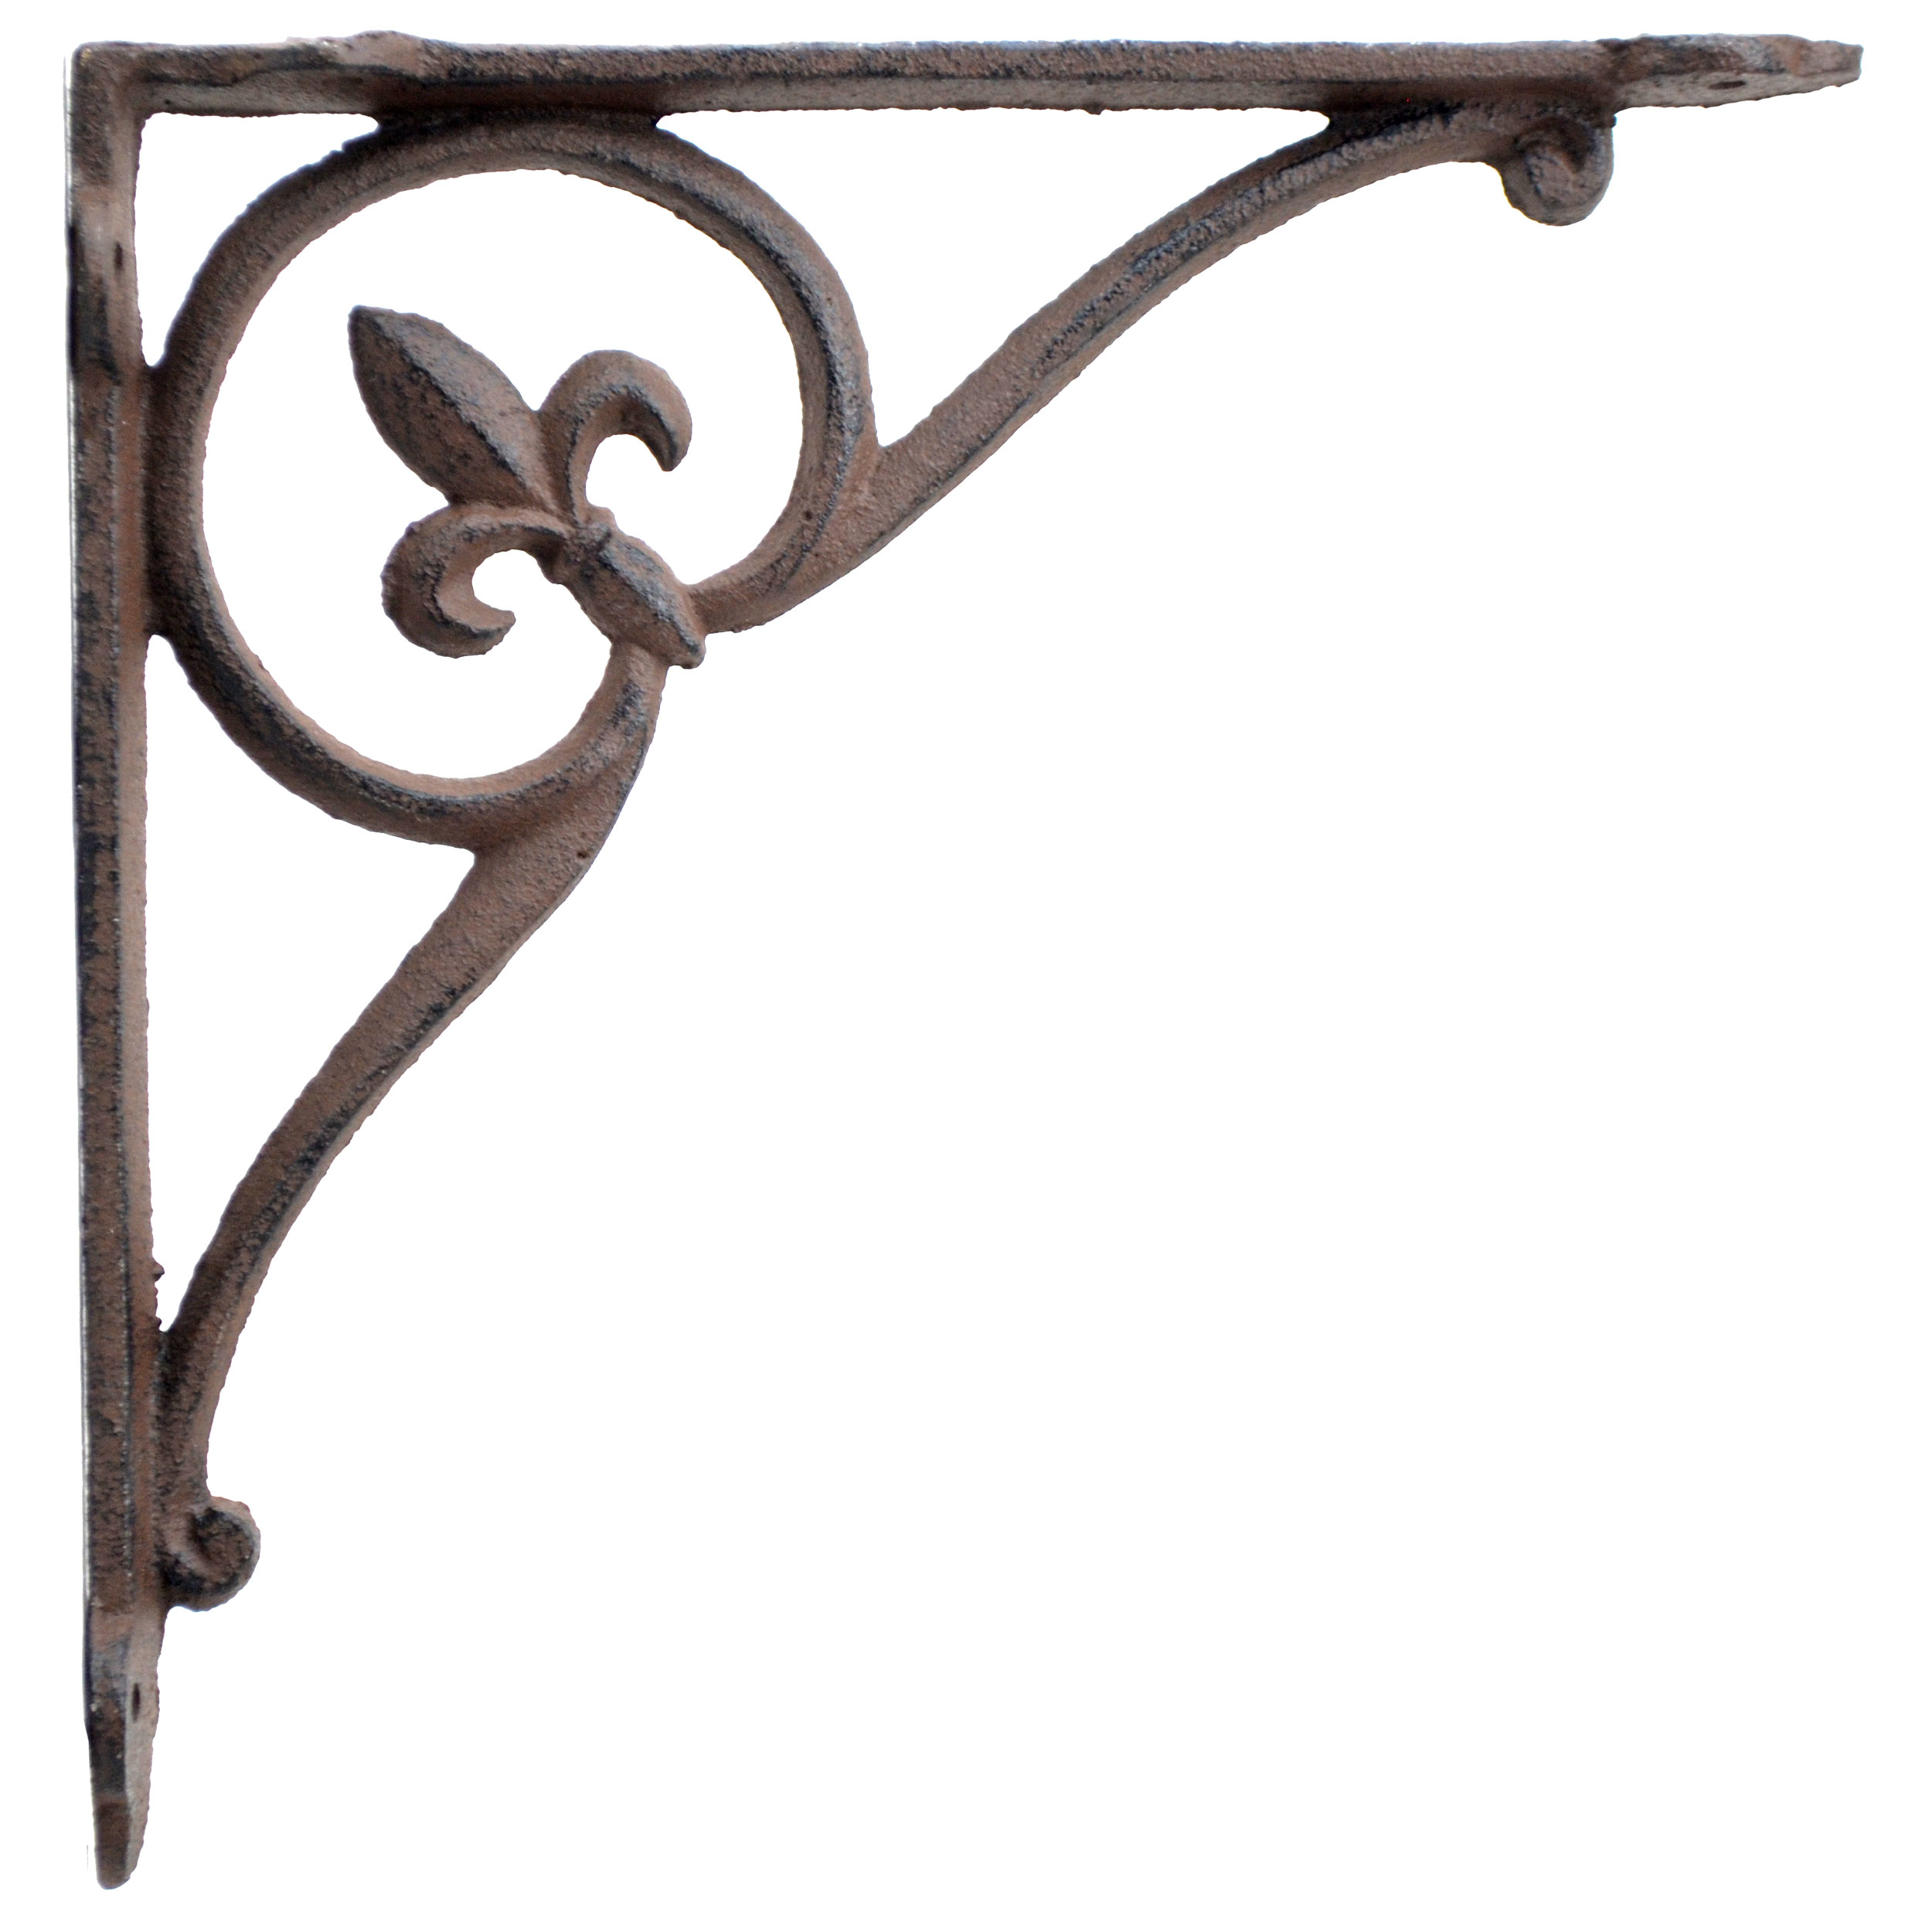 2 Cast Iron Shelf Brackets with a Large Star in a circle. 